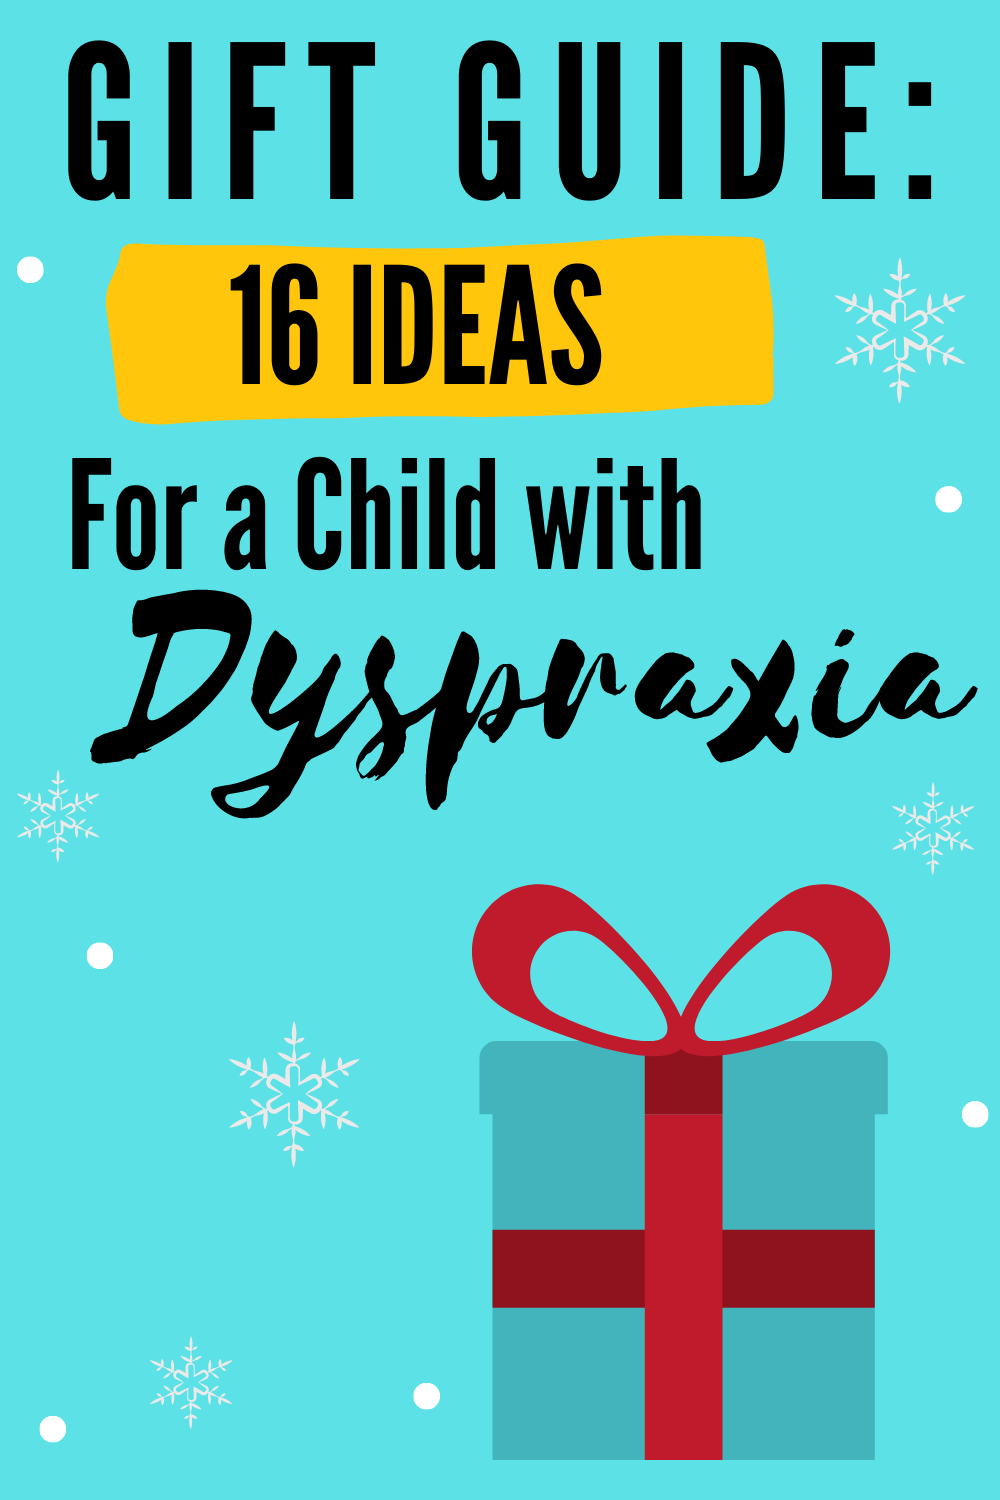 Gift-guide: 16 ideas for a child with dyspraxia